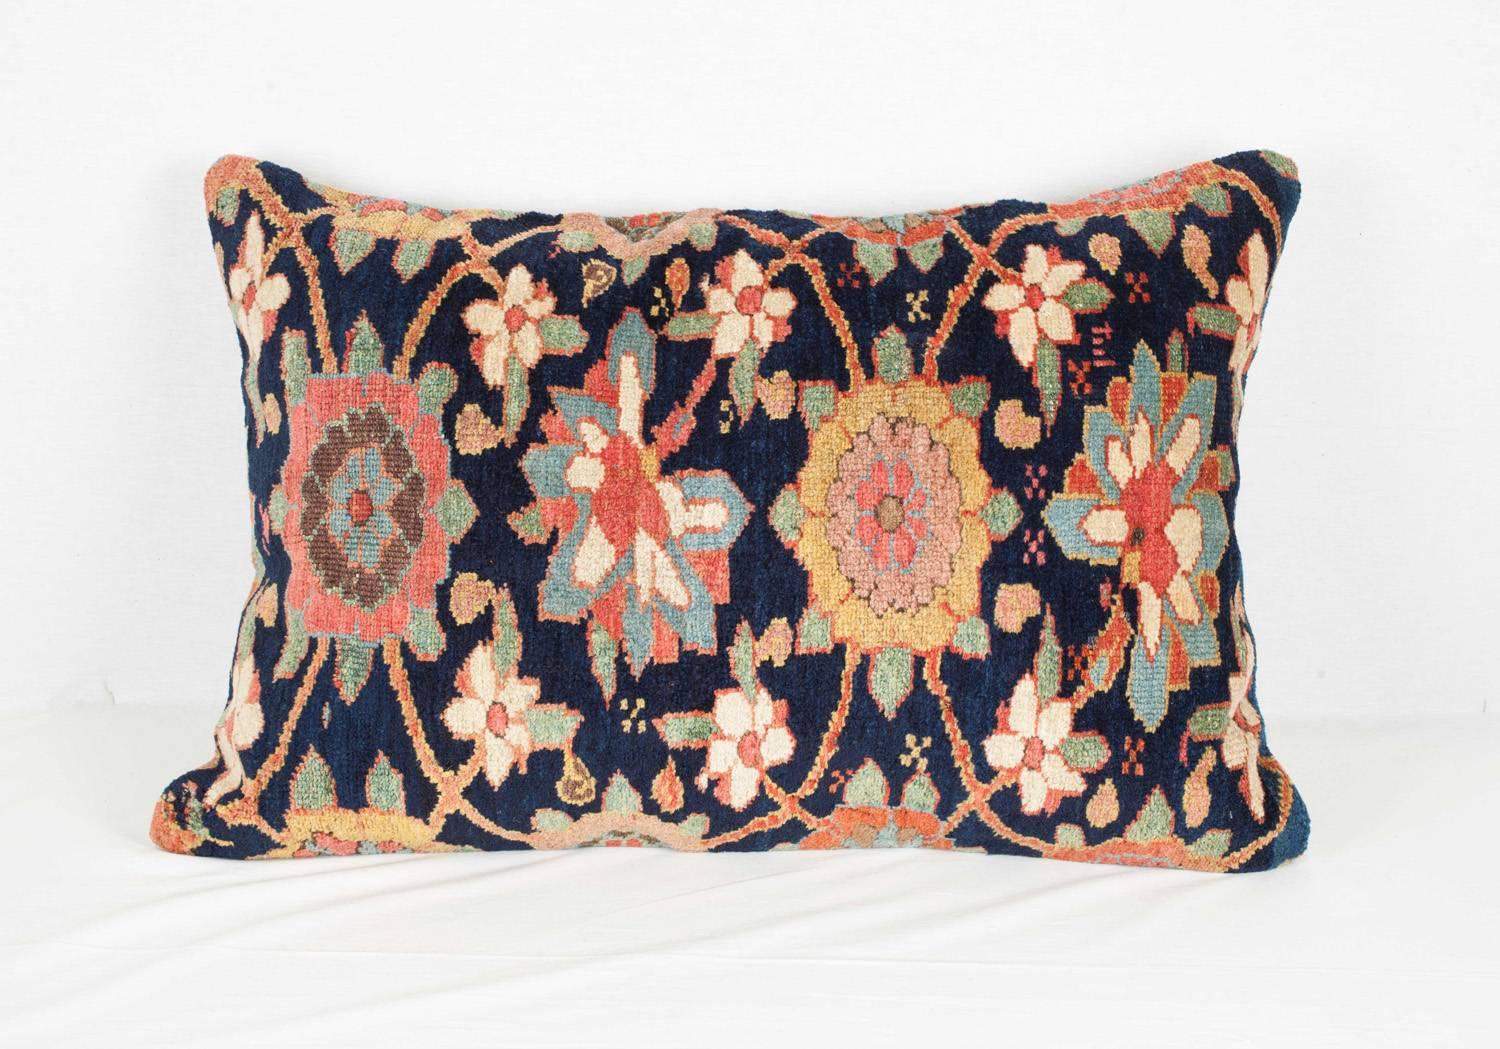 A pillow fashioned from an antique Northwest Persian carpet.  The colors are all derived from natural dyes.  The condition is good with no holes, repair or stains.

It comes with an insert to accomodate the filling.
FILLING NOT PROVIDED

Item